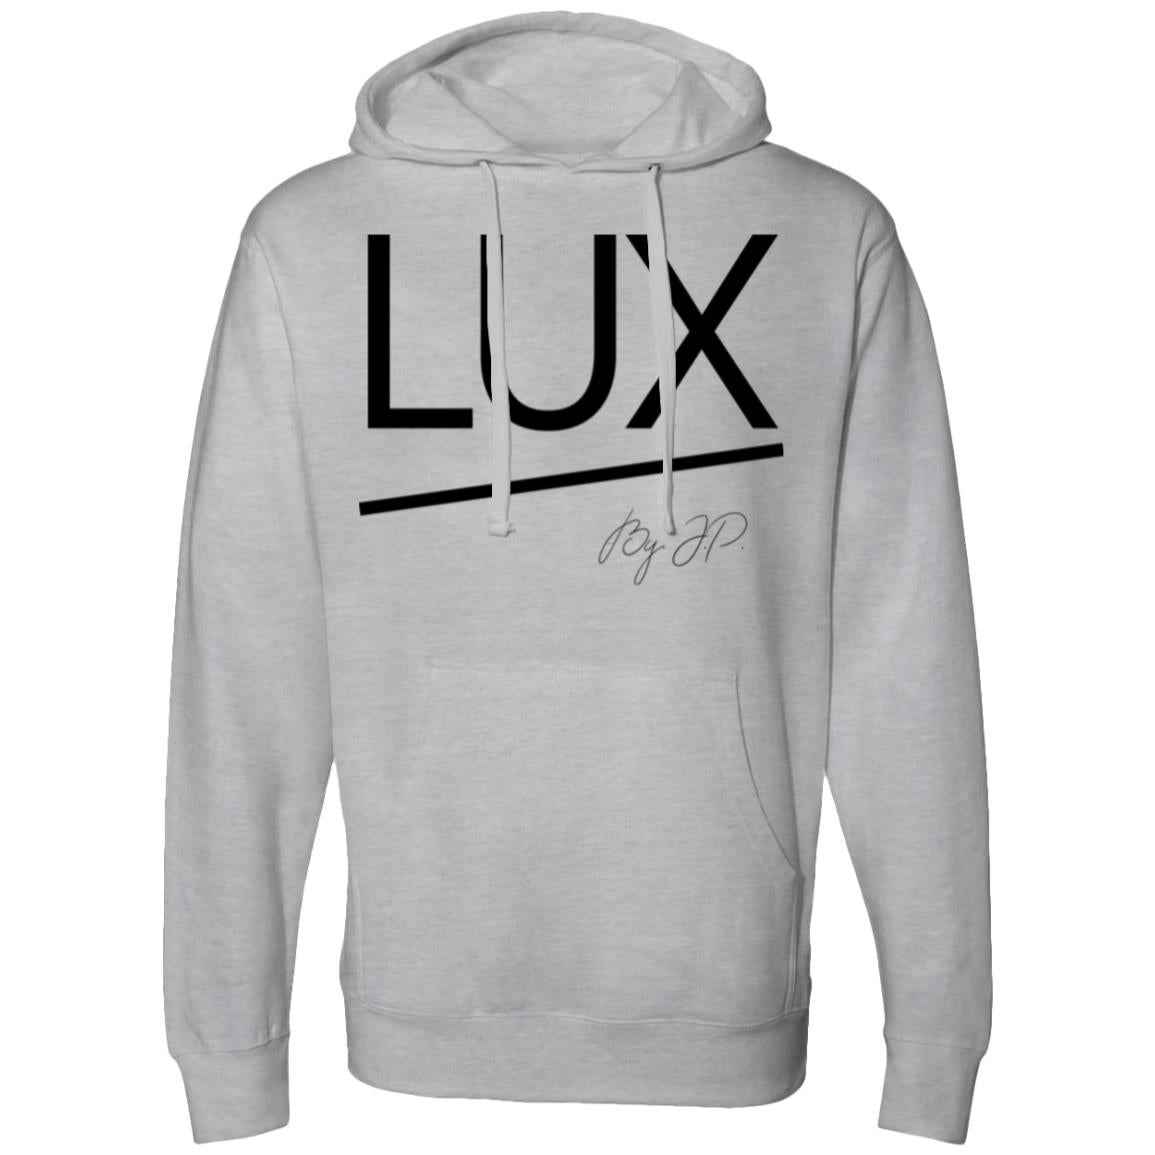 Lux. Midweight Hoodie - Gray Heather Edition